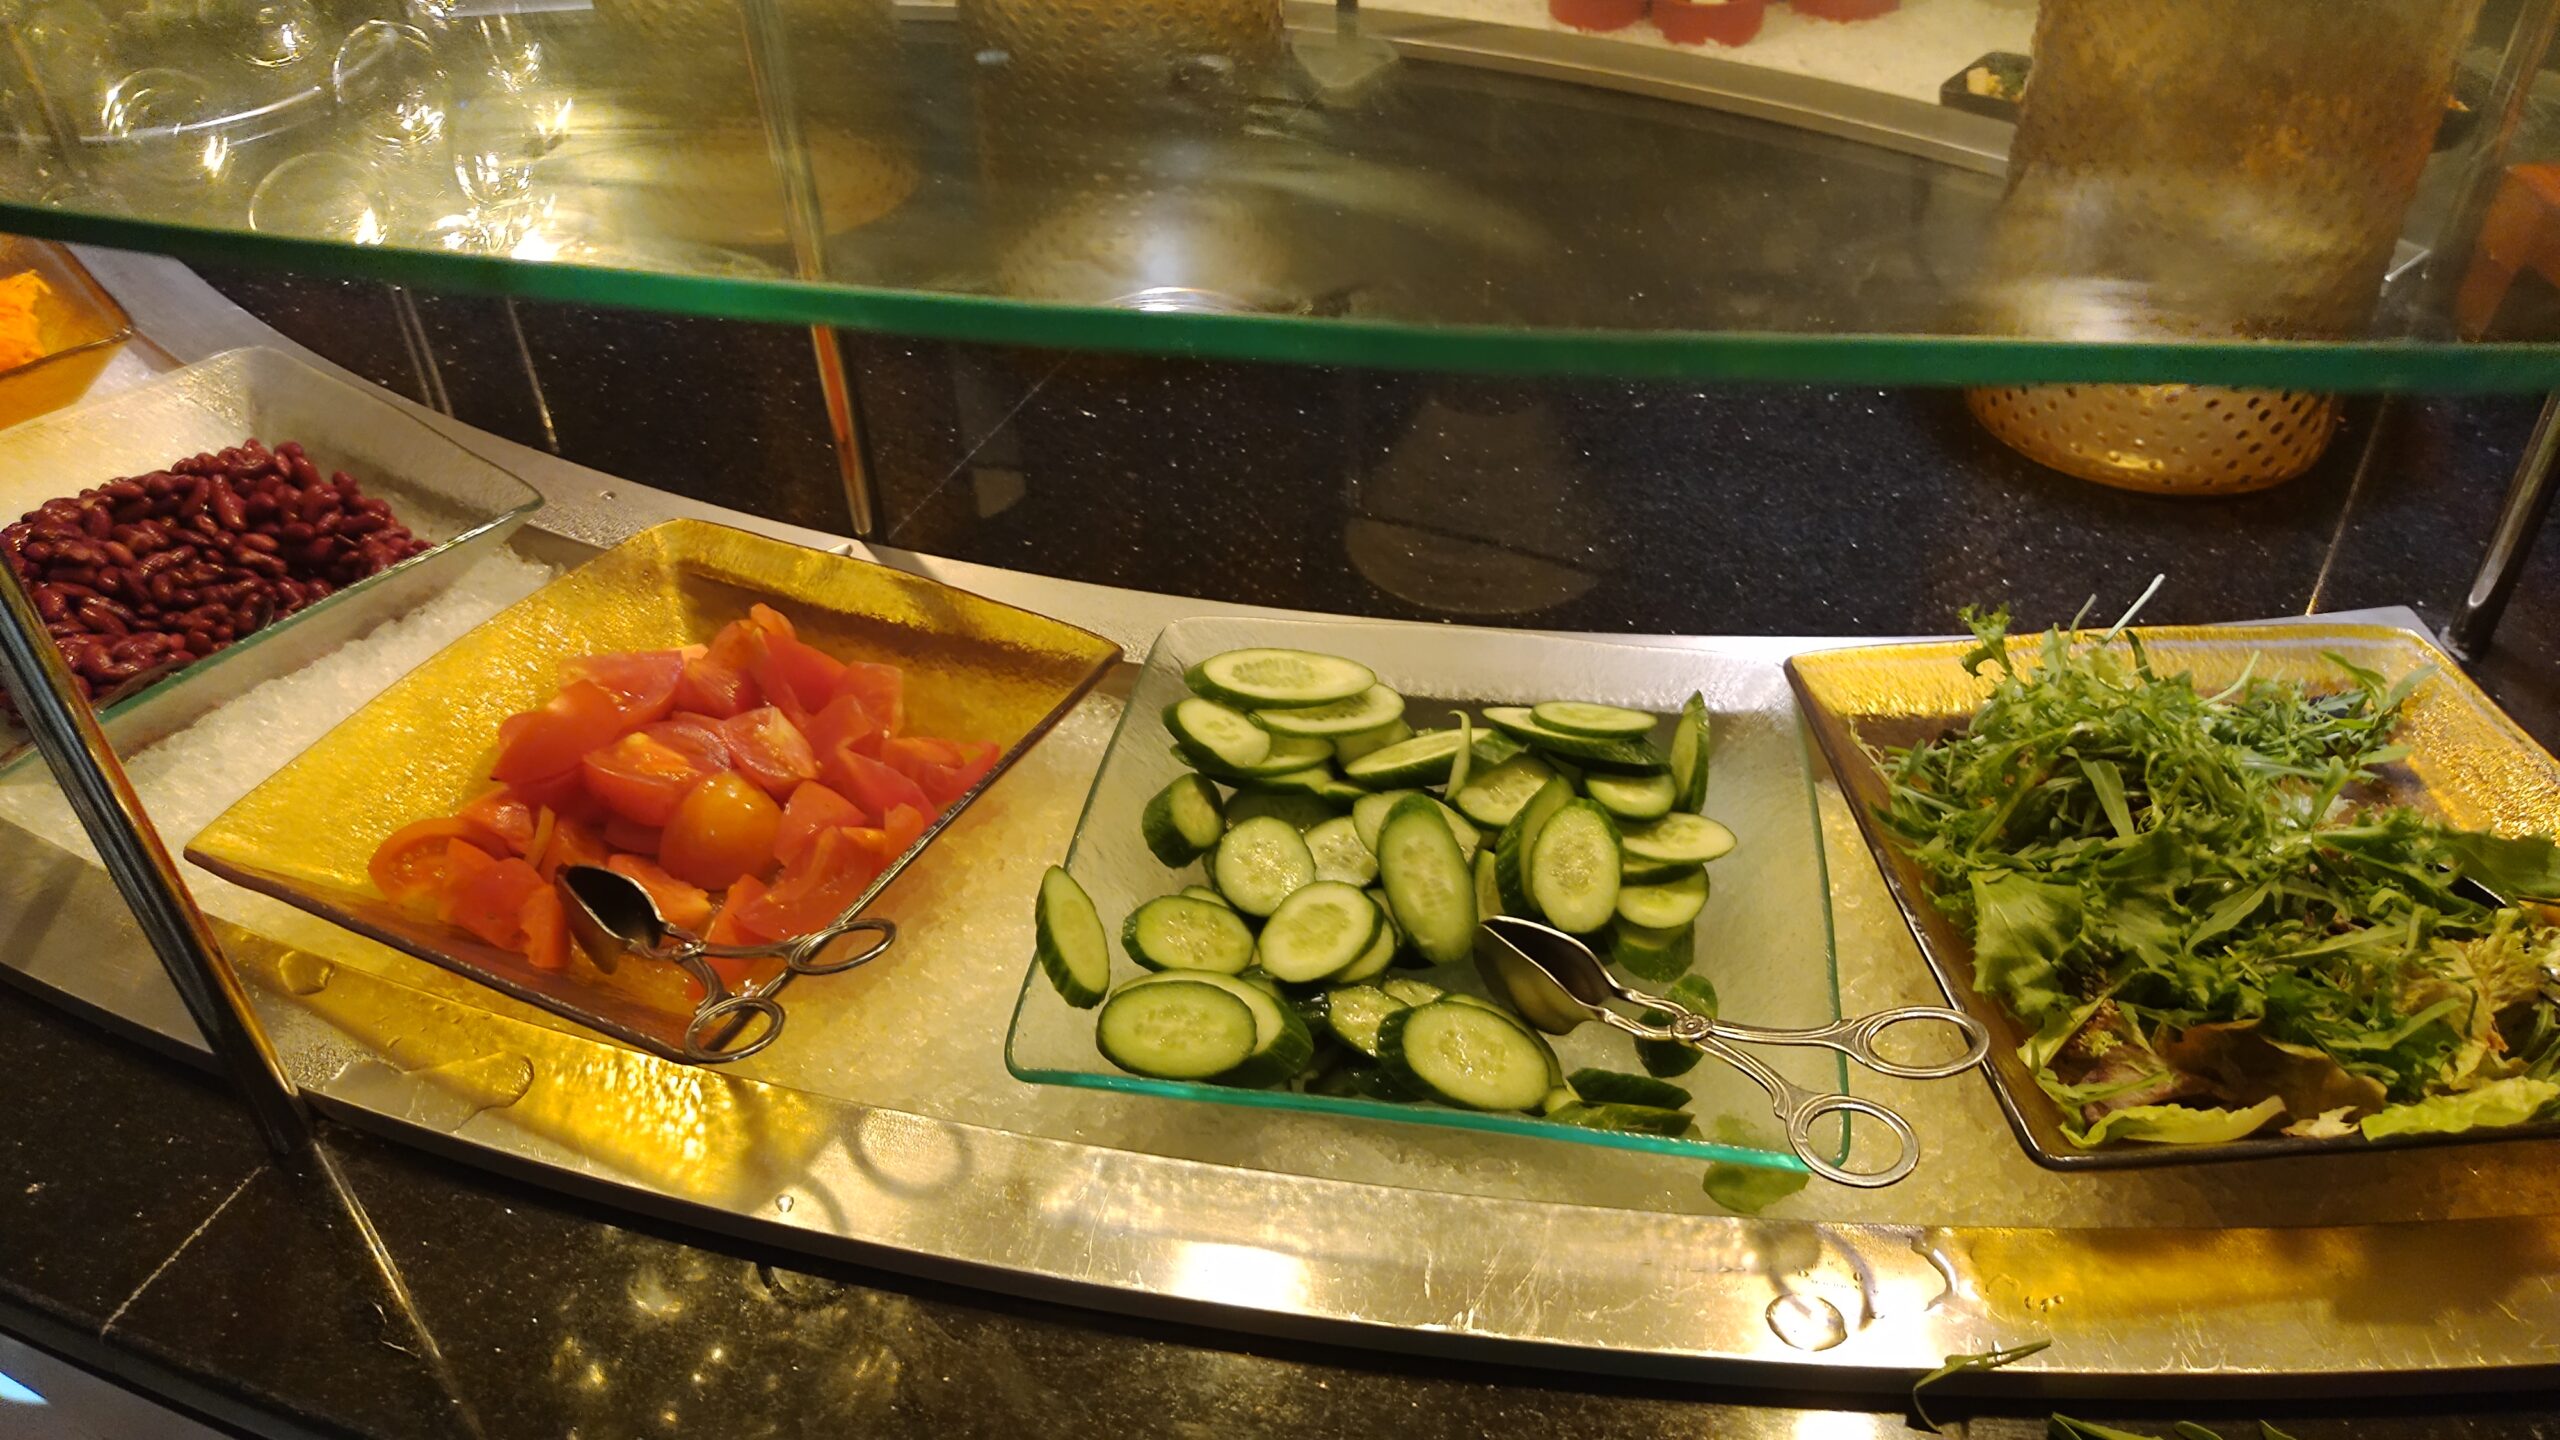 PICTURE OF THE SALAD BAR.